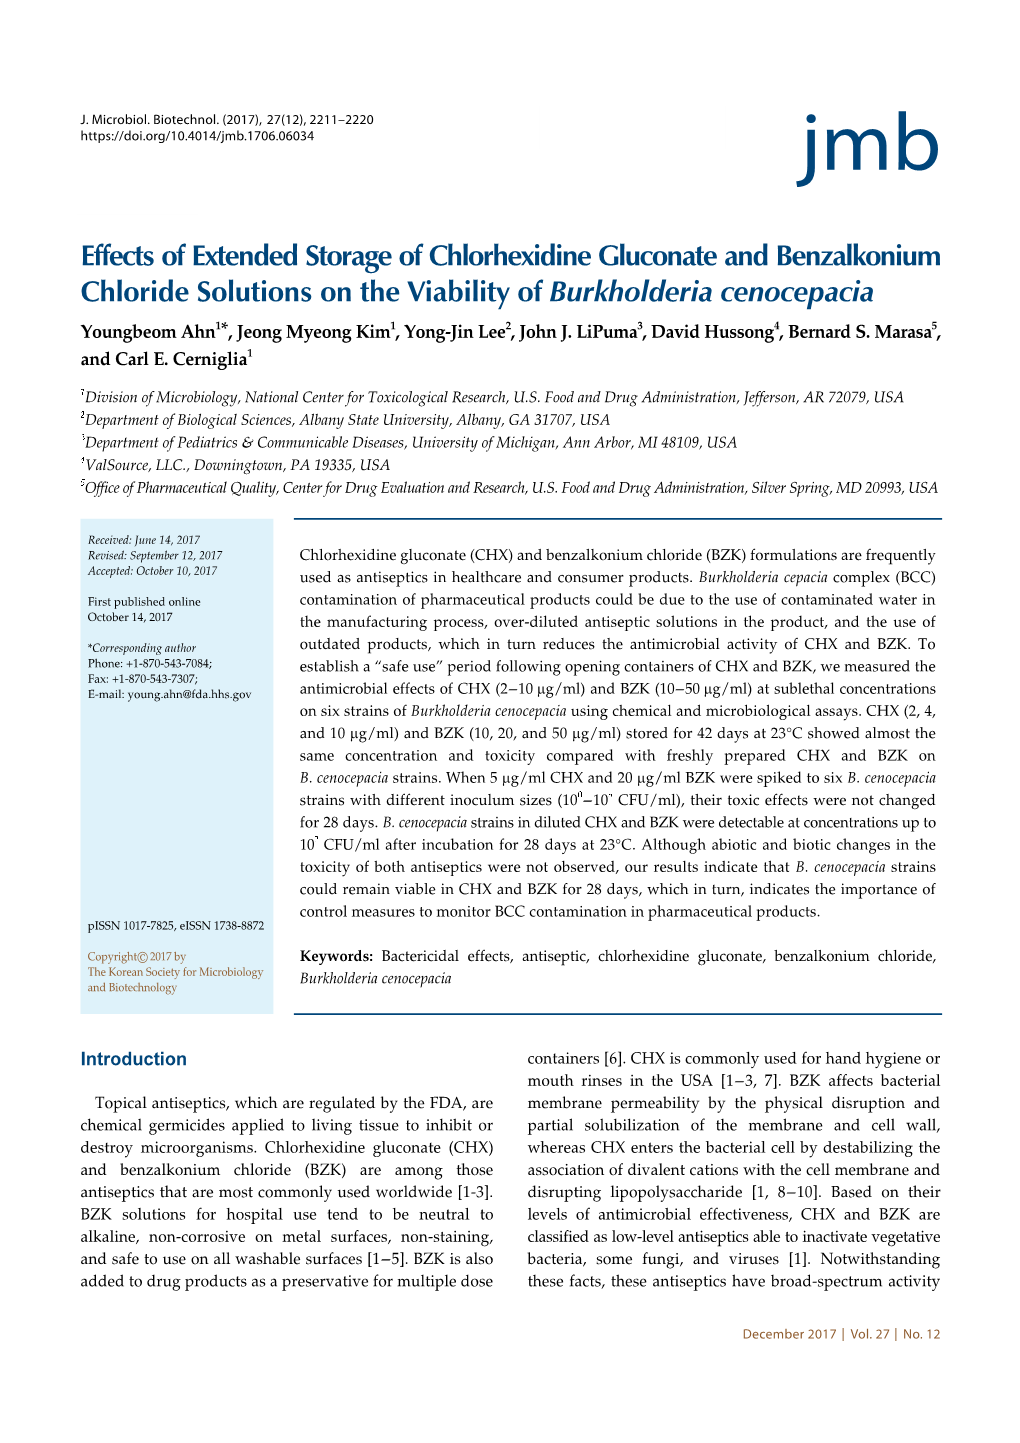 Effects of Extended Storage of Chlorhexidine Gluconate And